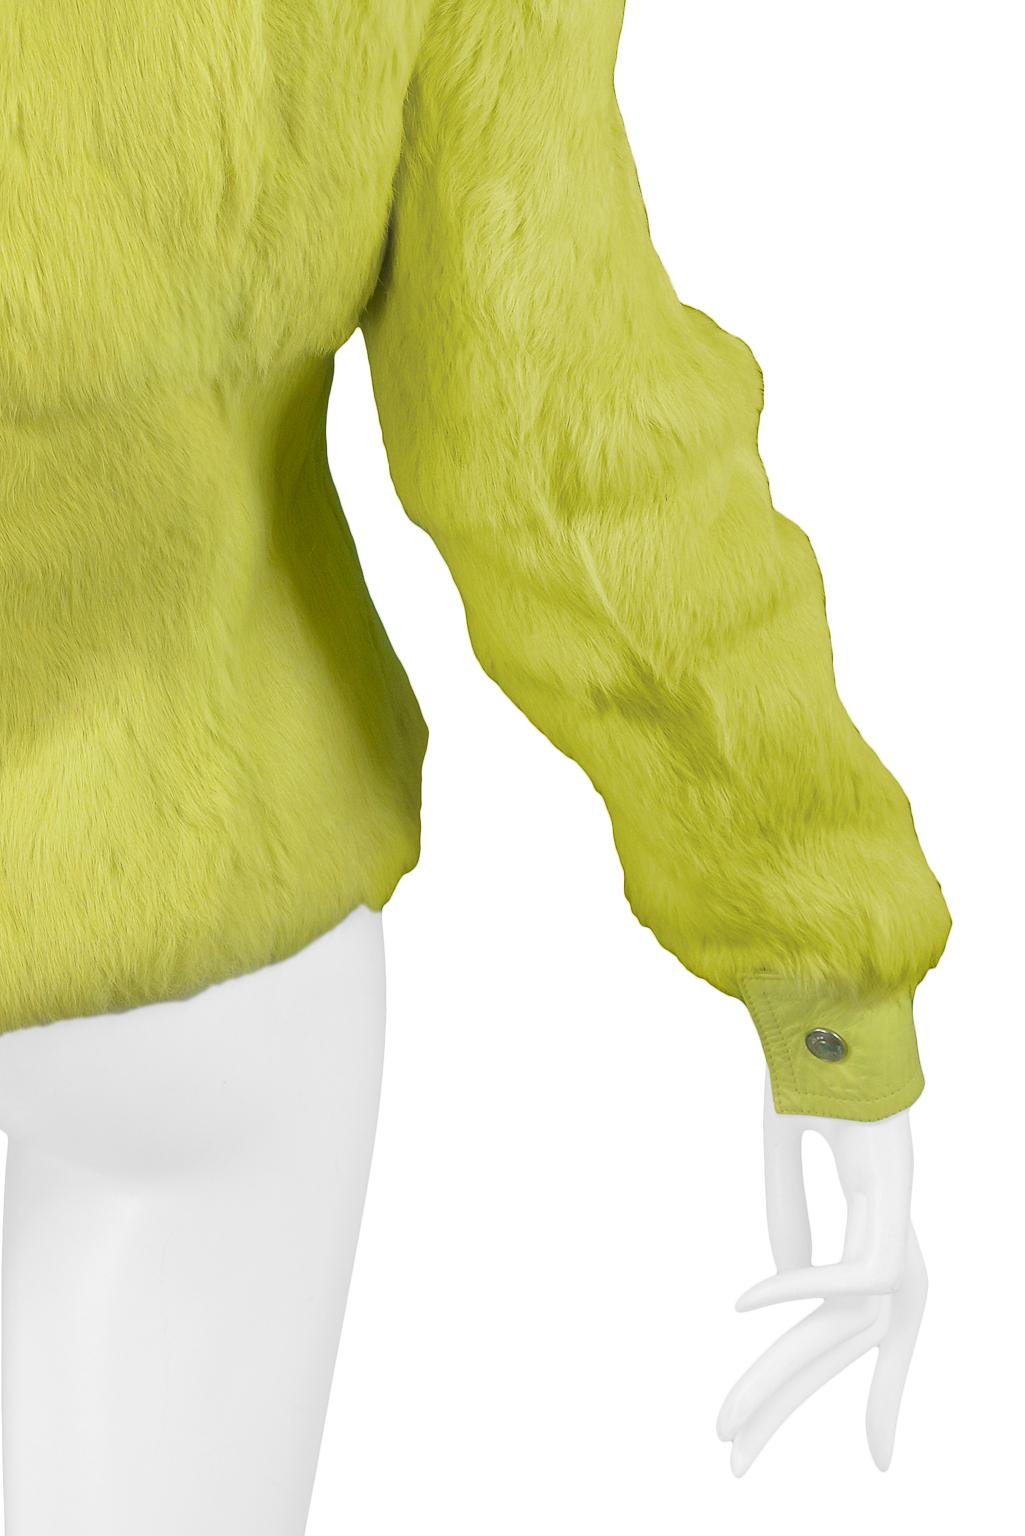 Christian Dior Neon Yellow Fur and Leather Jacket 2001 1